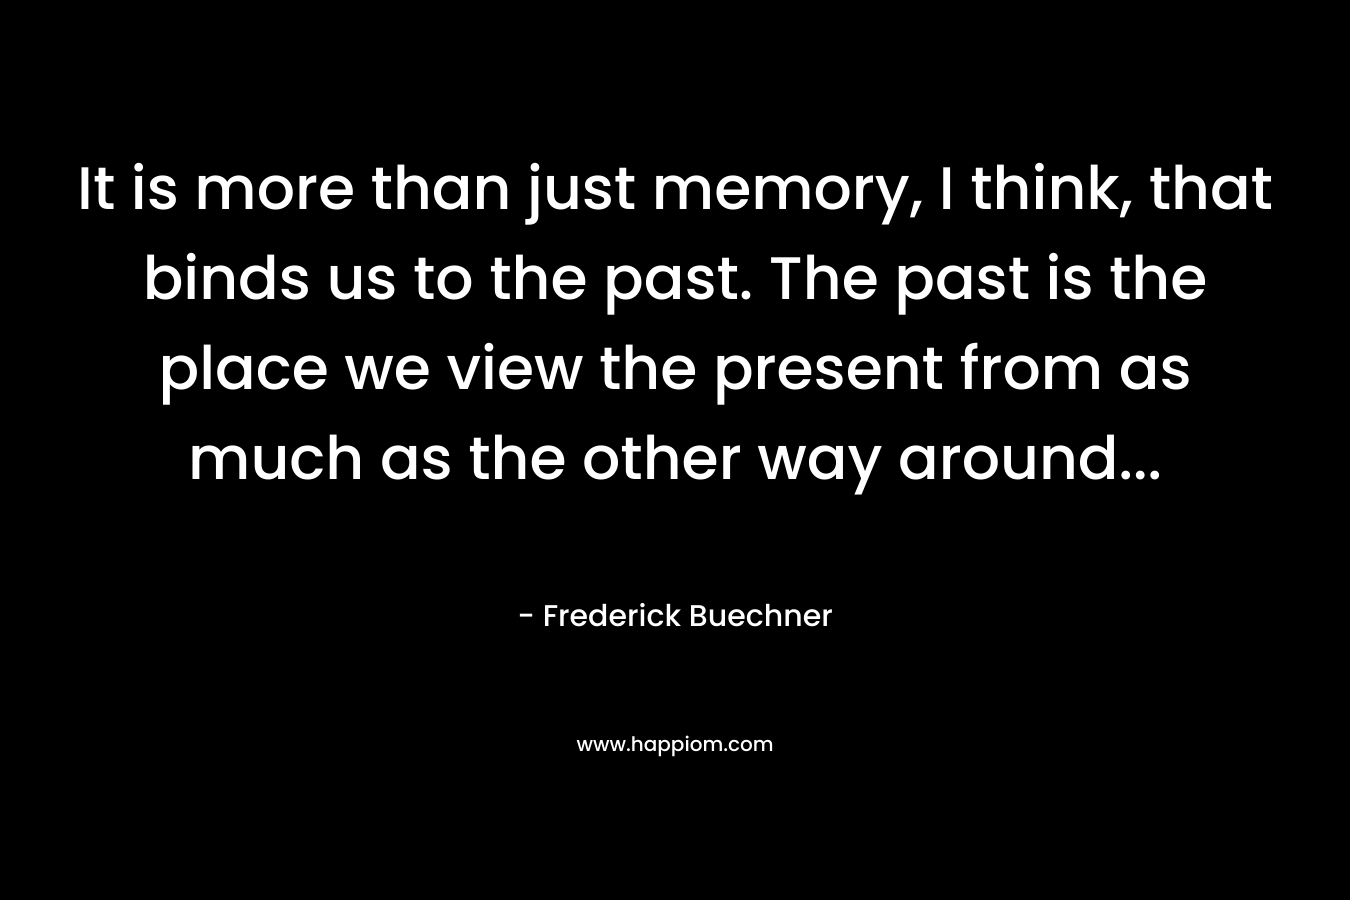 It is more than just memory, I think, that binds us to the past. The past is the place we view the present from as much as the other way around...